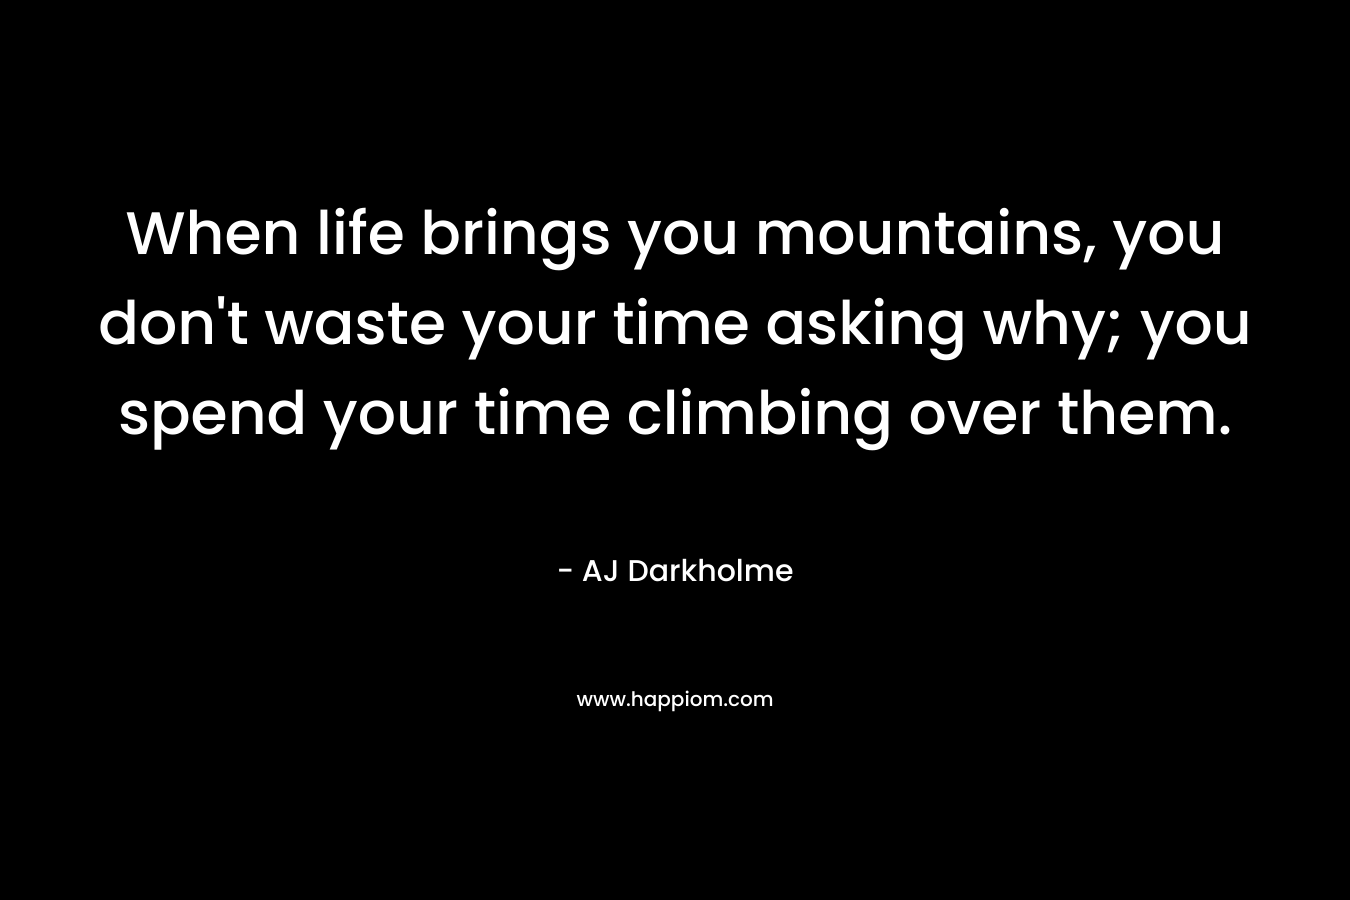 When life brings you mountains, you don't waste your time asking why; you spend your time climbing over them.